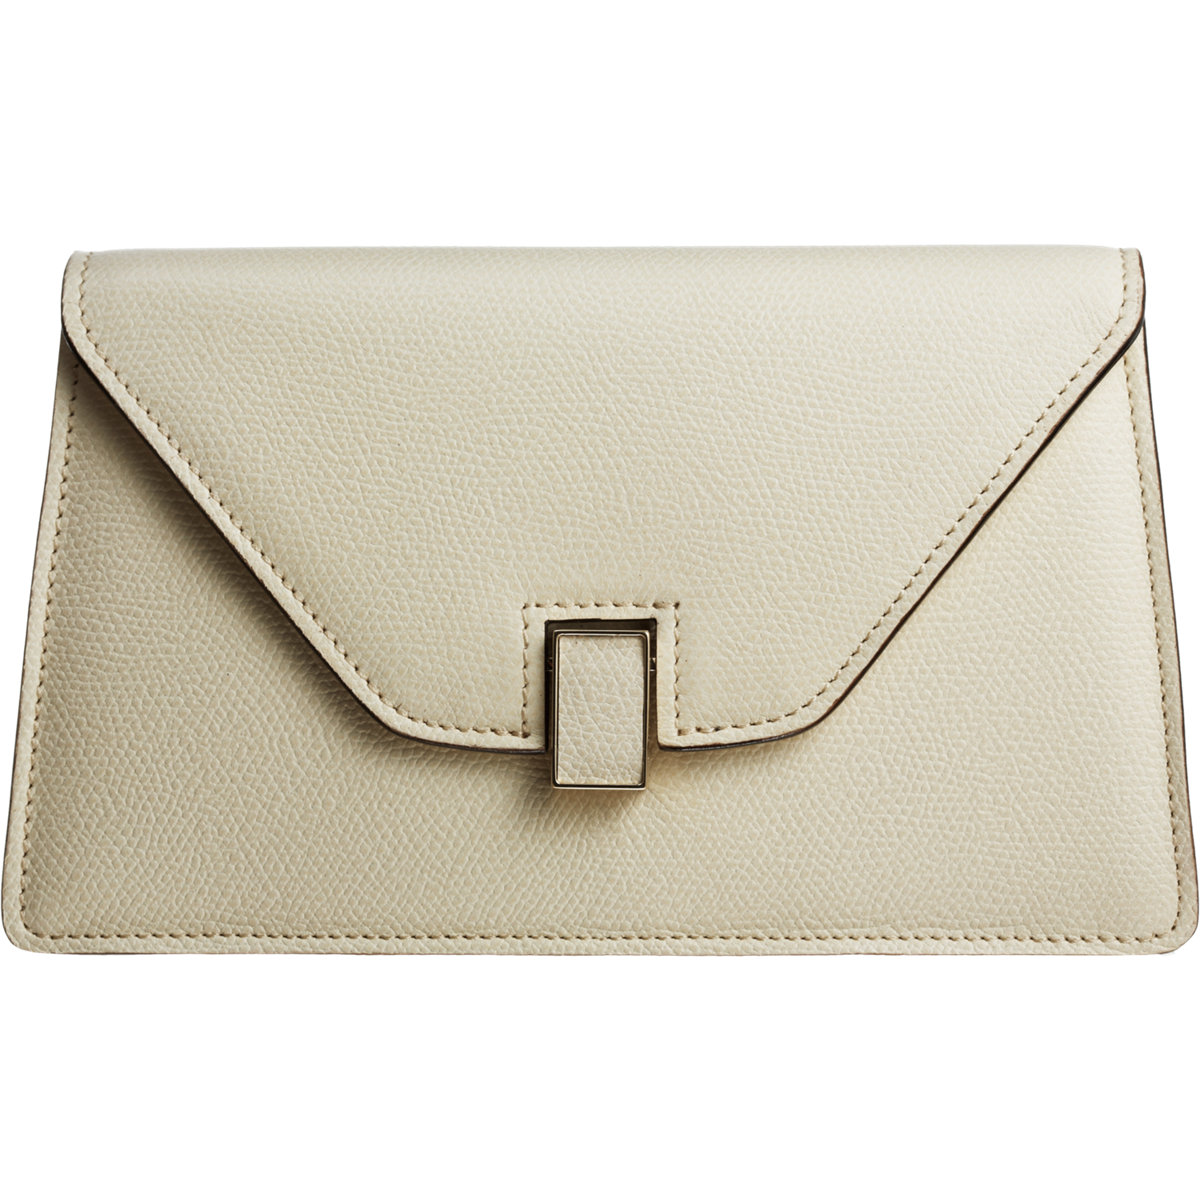 Valextra Isis Mini Clutch in White (gold) | Lyst